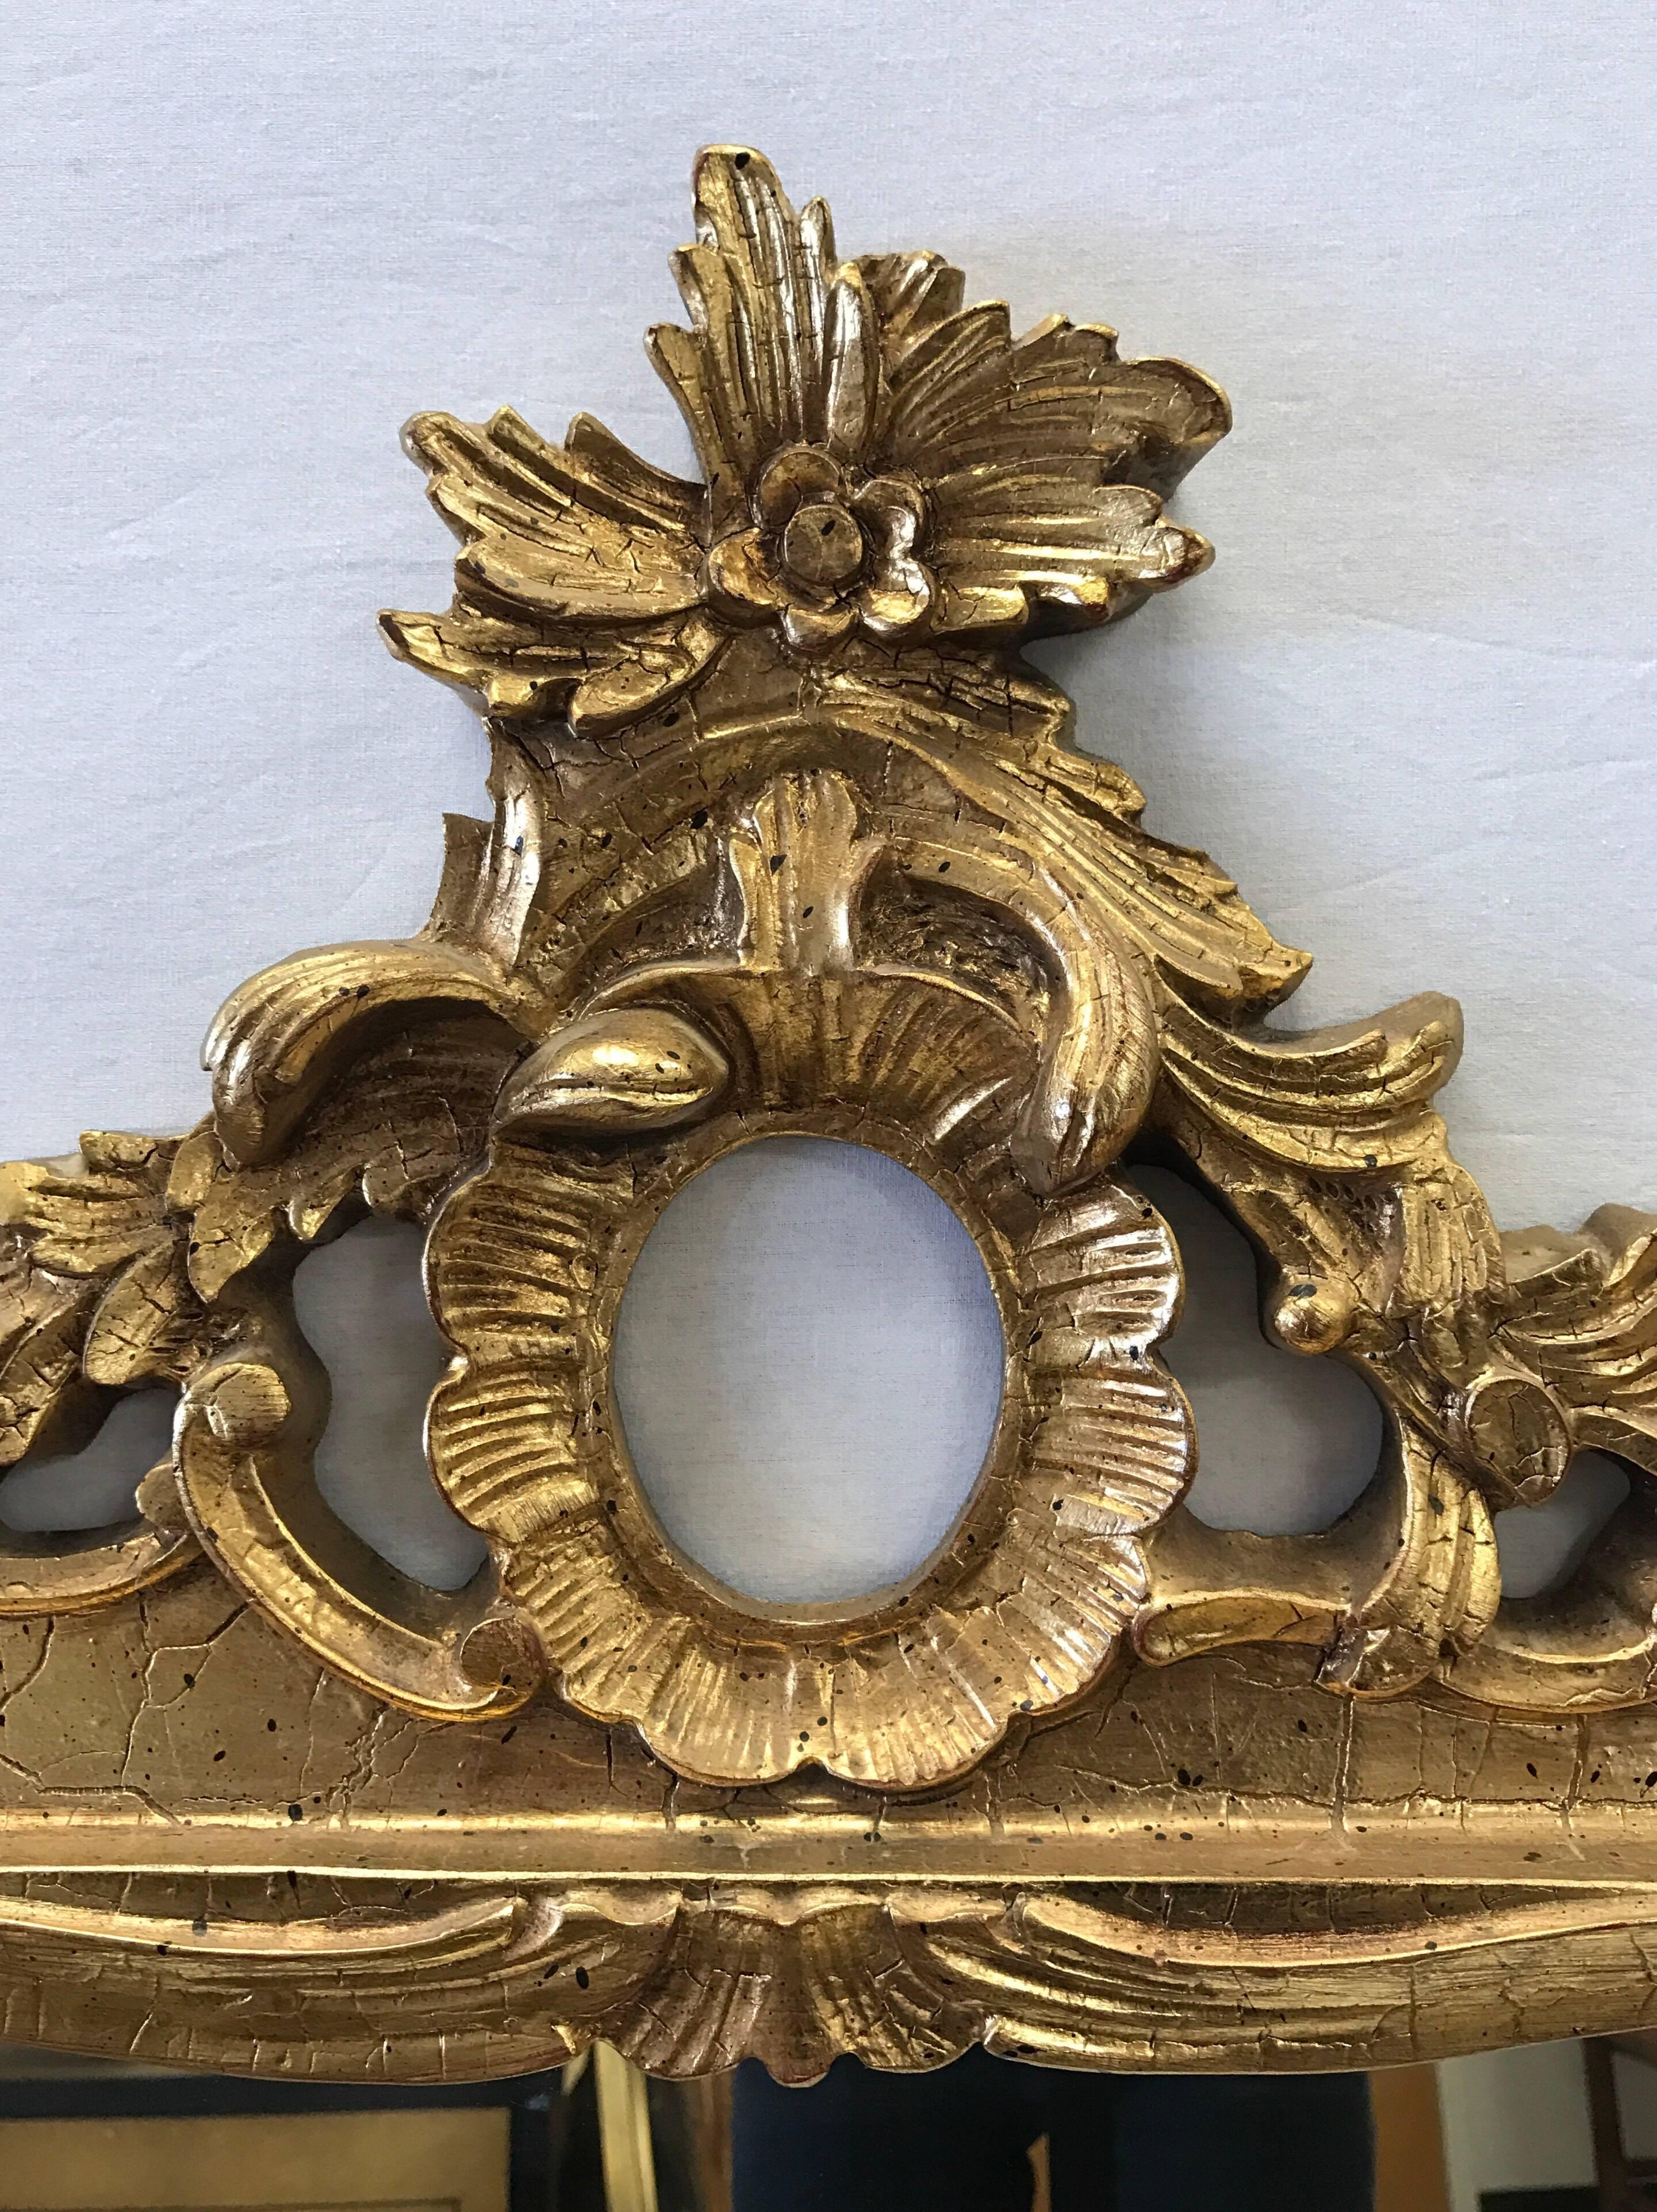 Exquisite 20th century French carved giltwood mirror with scroll and foliate detail.